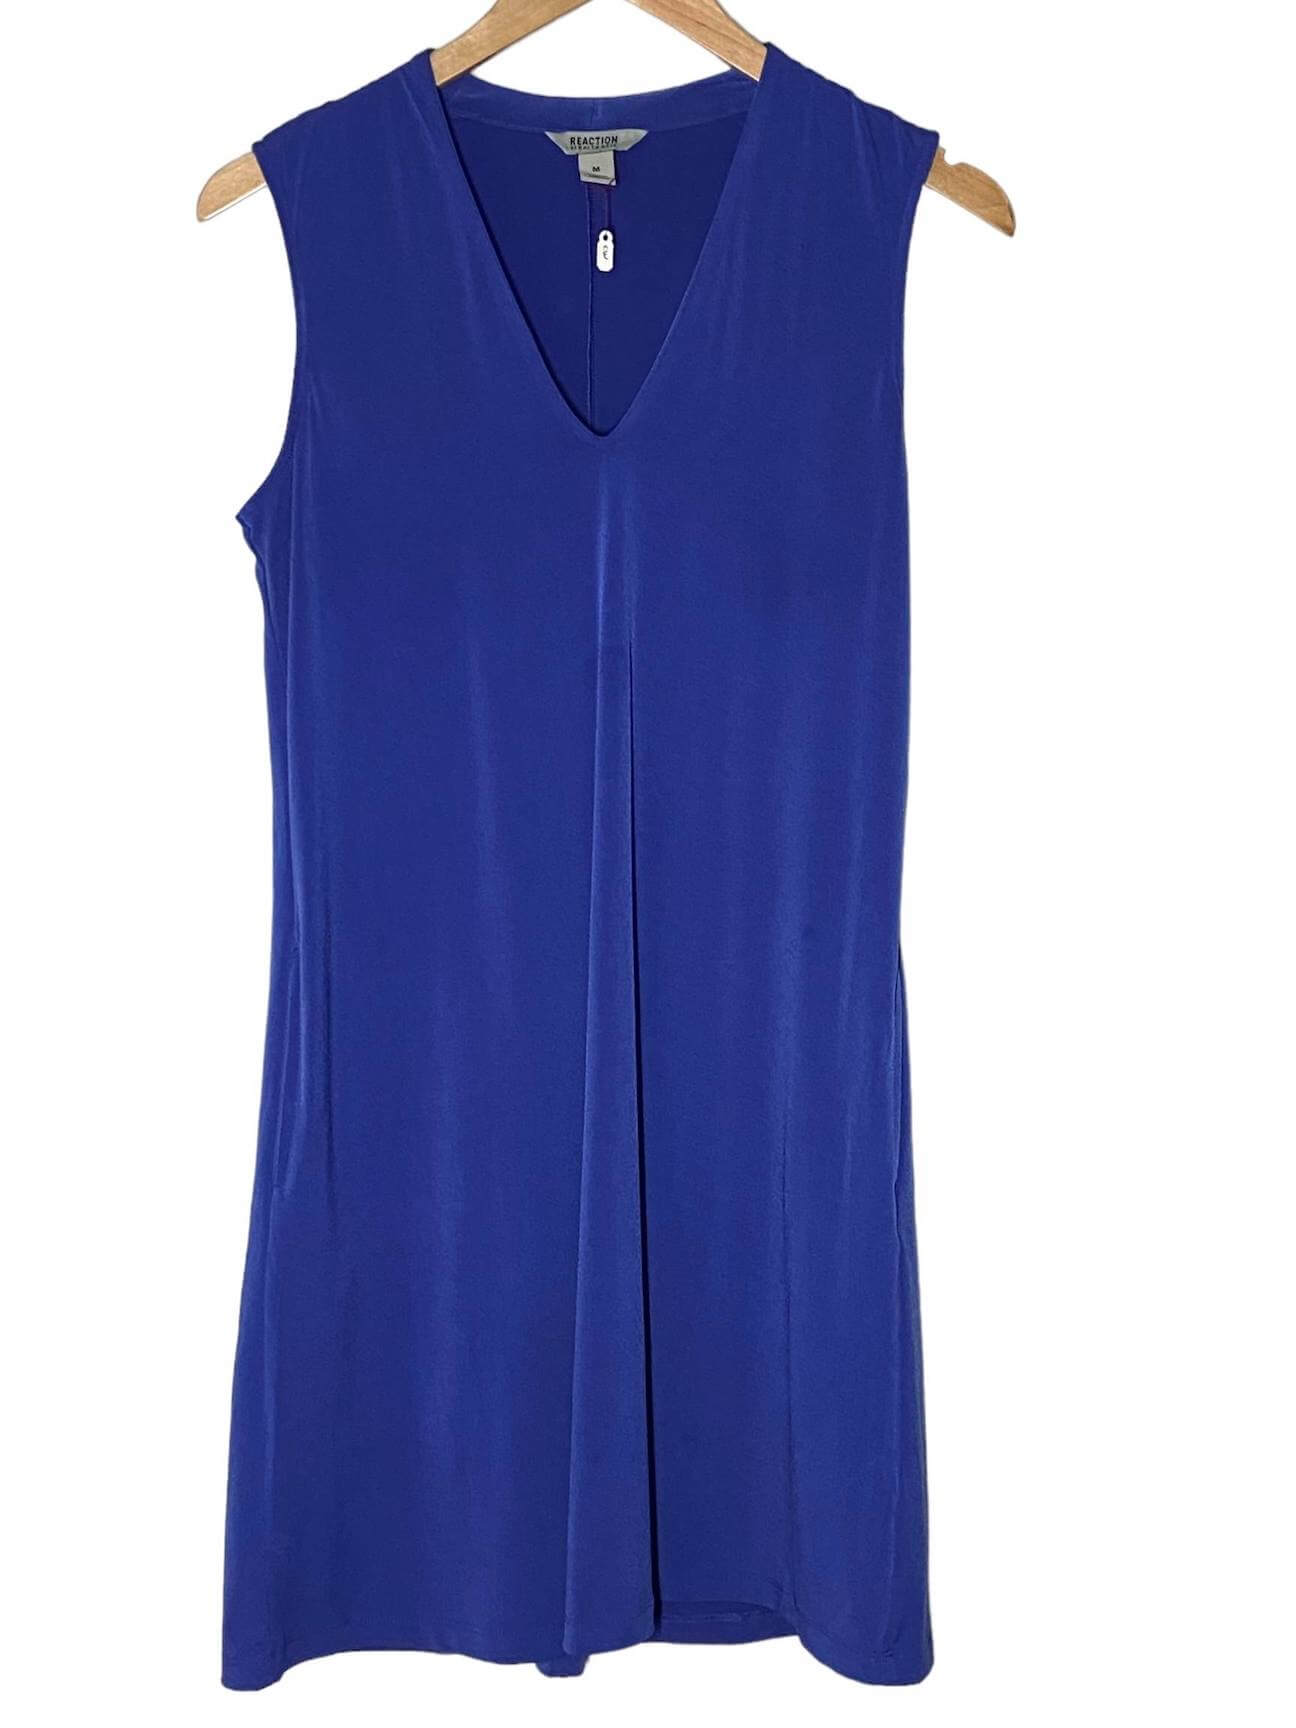 Cool Winter REACTION by KENNETH COLE royal blue stretch sheath dress